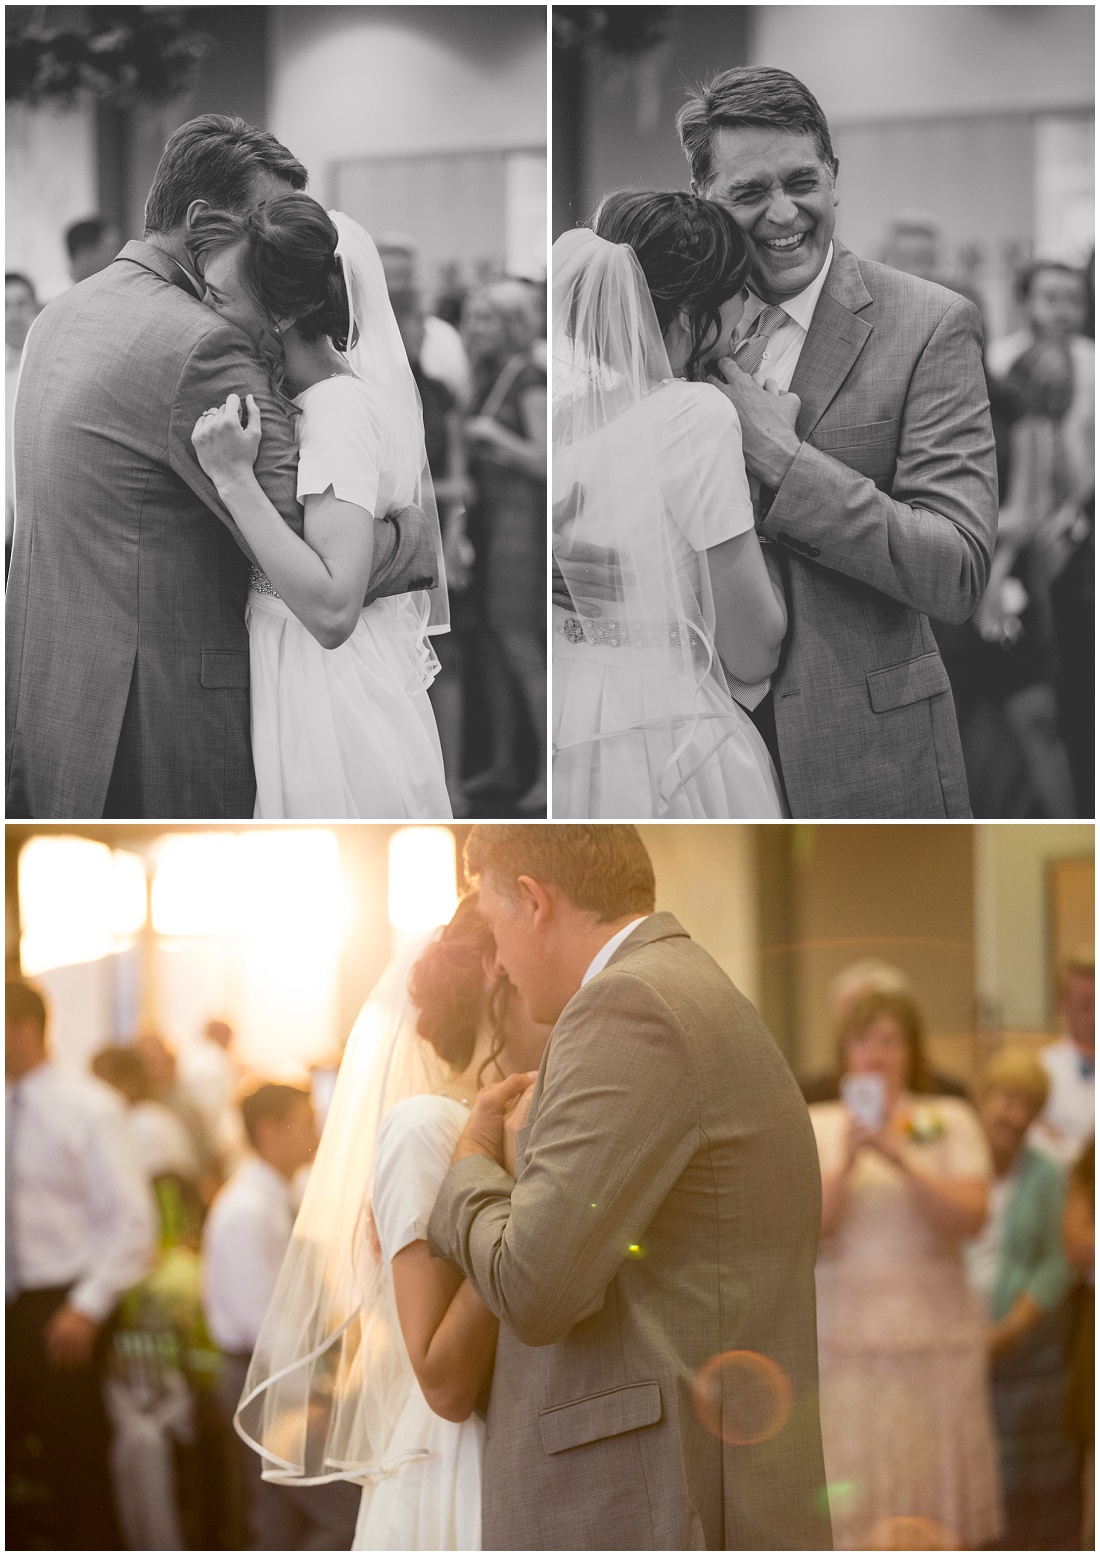 Touching Father Daughter dance photographed by Alysha Sladek